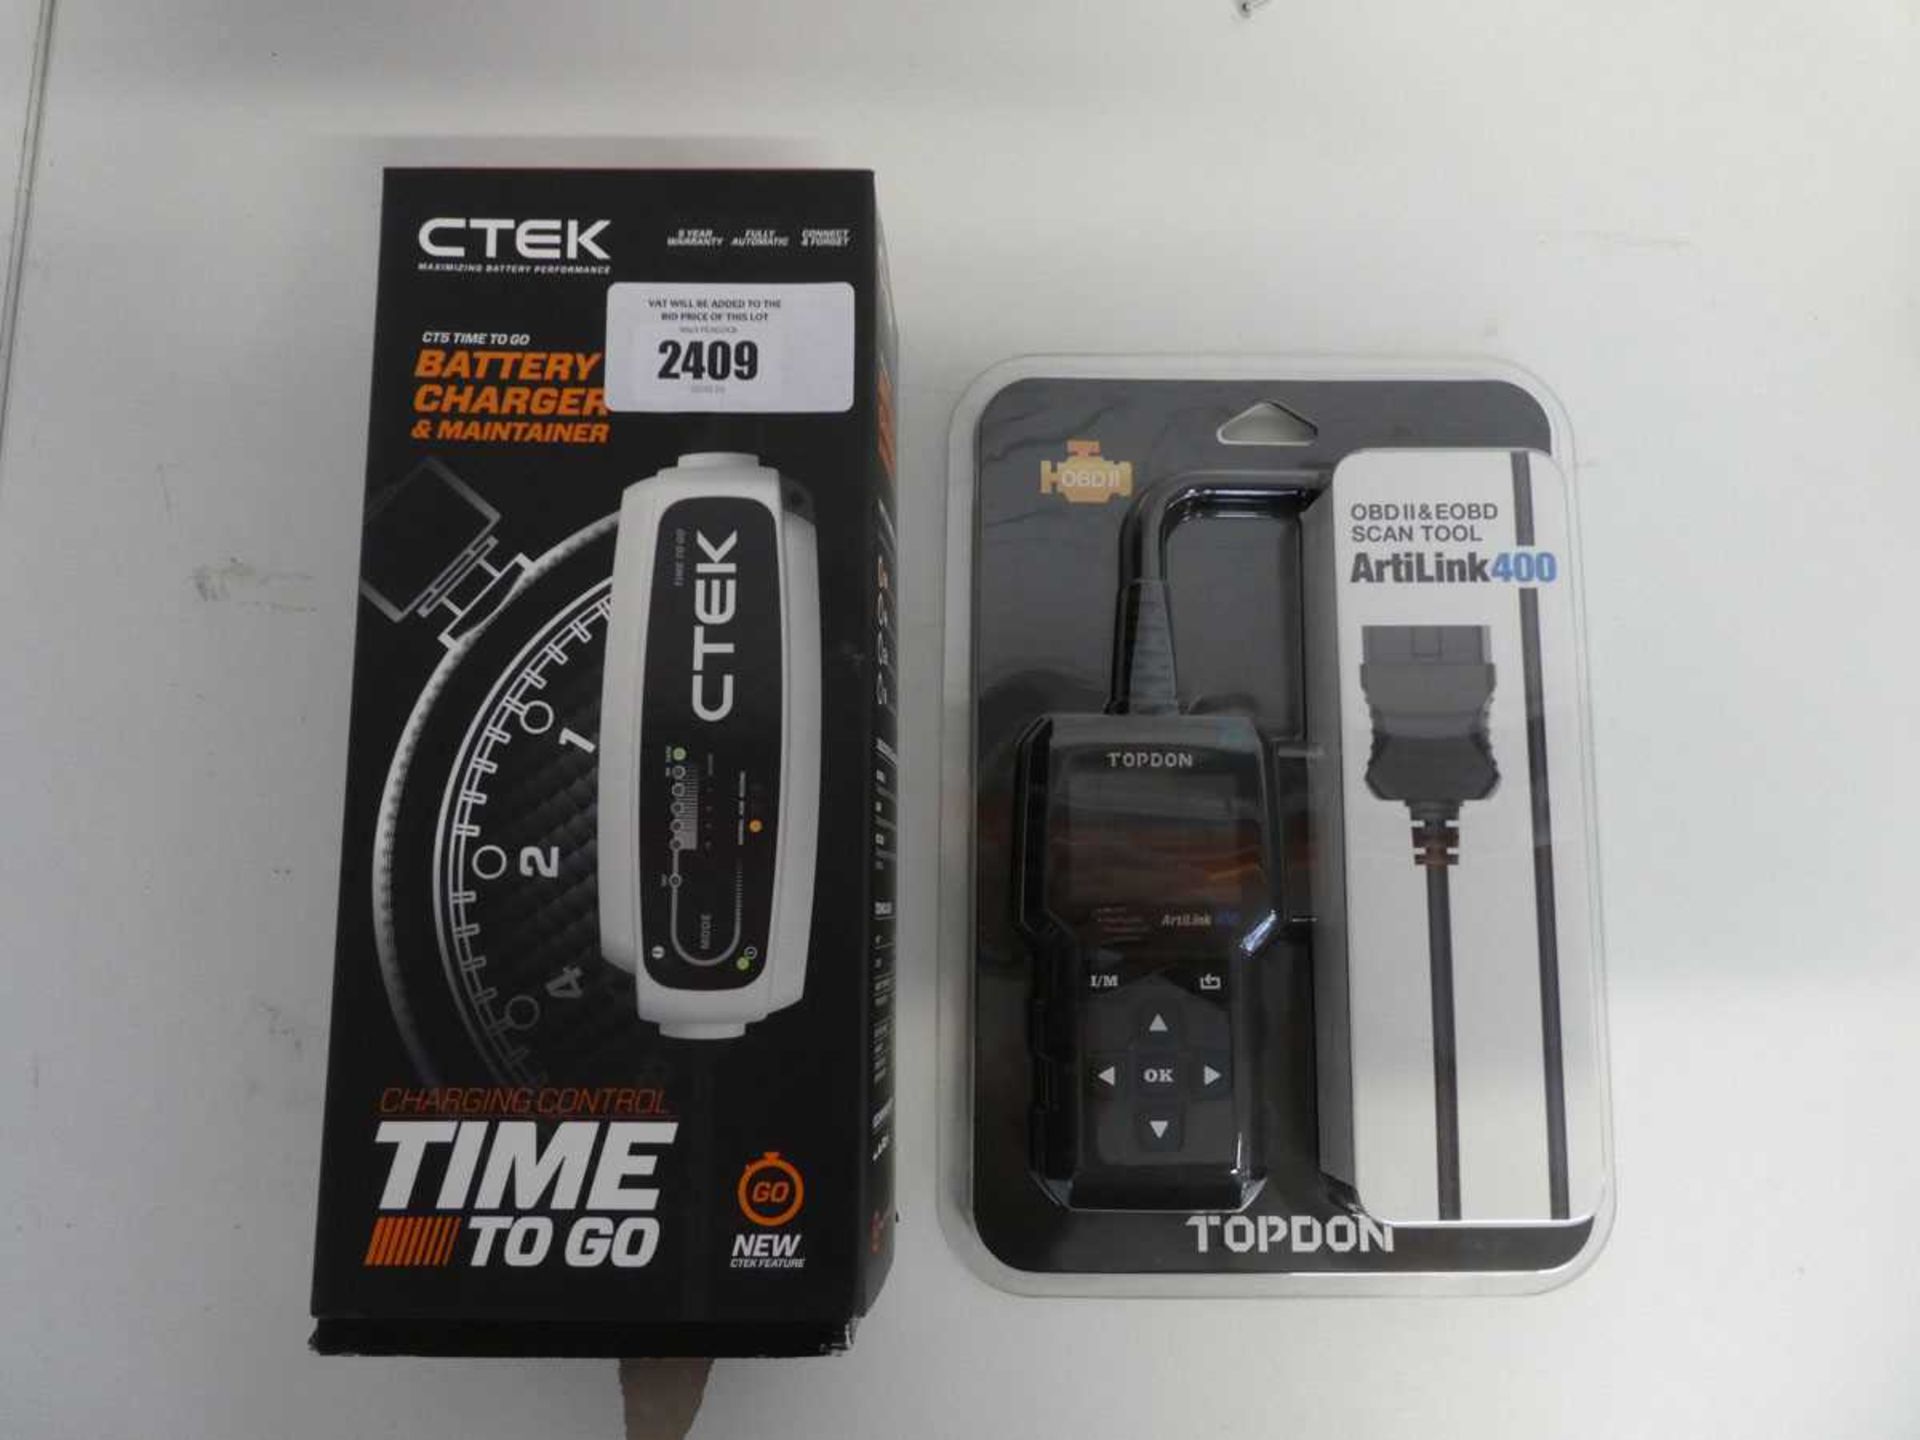 +VAT CTEK battery charger and maintainer with TOPDON ArtiLink 400 OBDII & EOBD scan tool